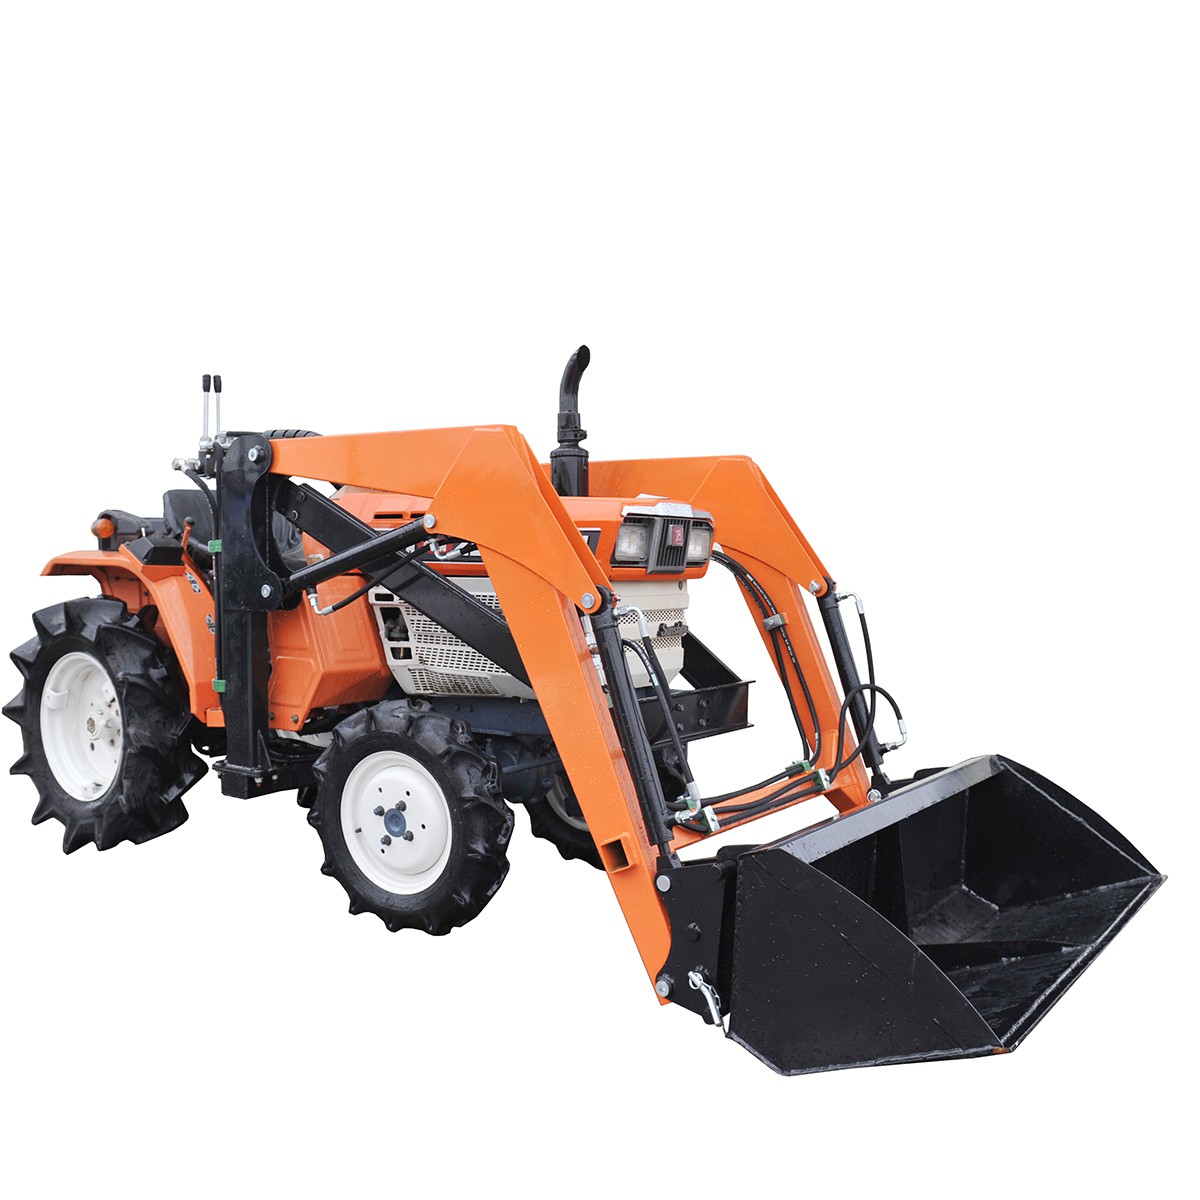 Kubota ZB1402 DT 4x4 14HP with front leader